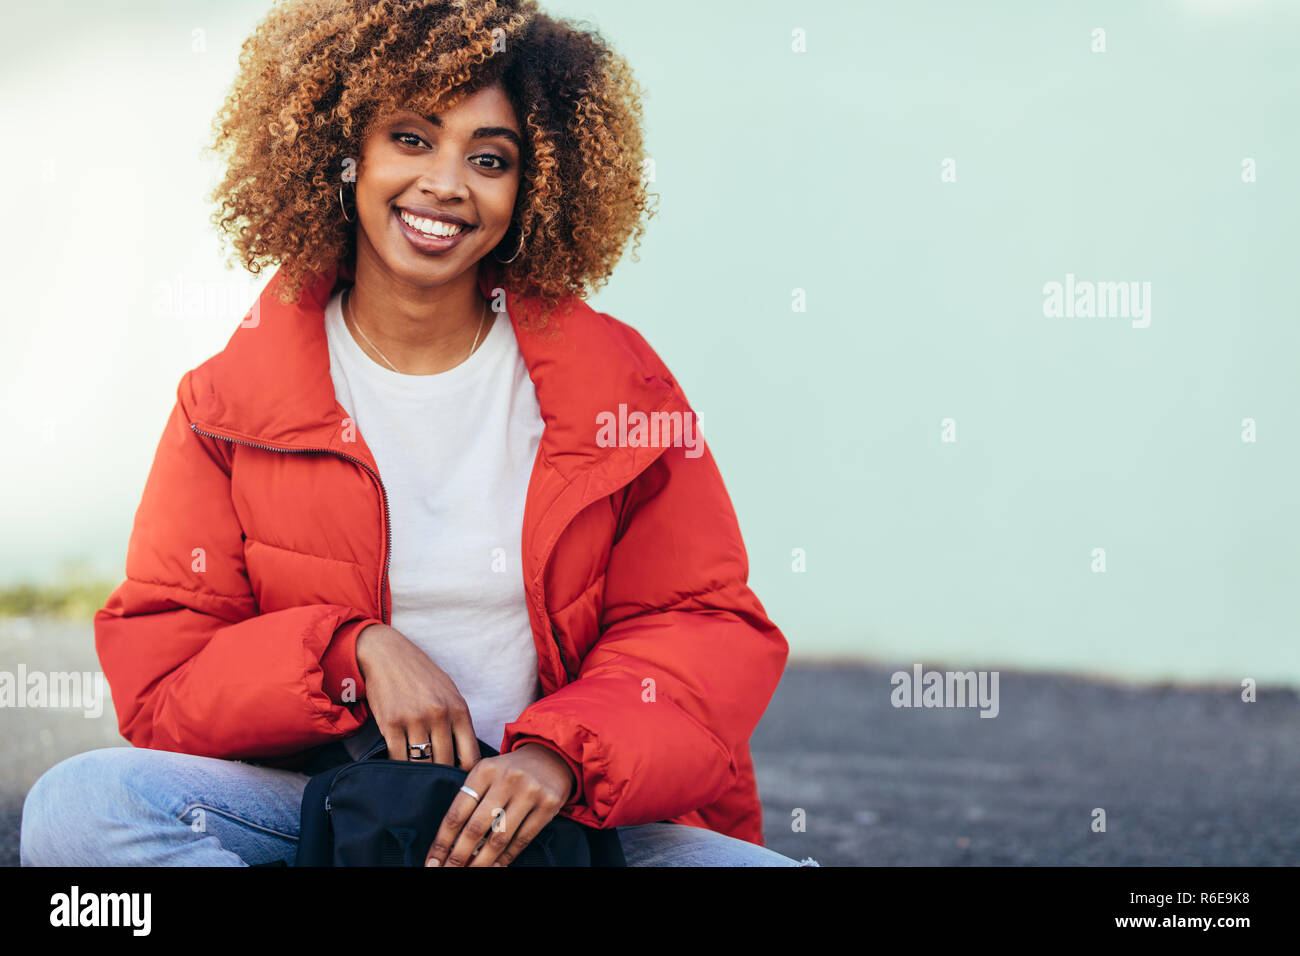 Cheerful afro american woman sitting outdoors on street. Smiling tourist woman in jacket sitting on street holding a bag. Stock Photo